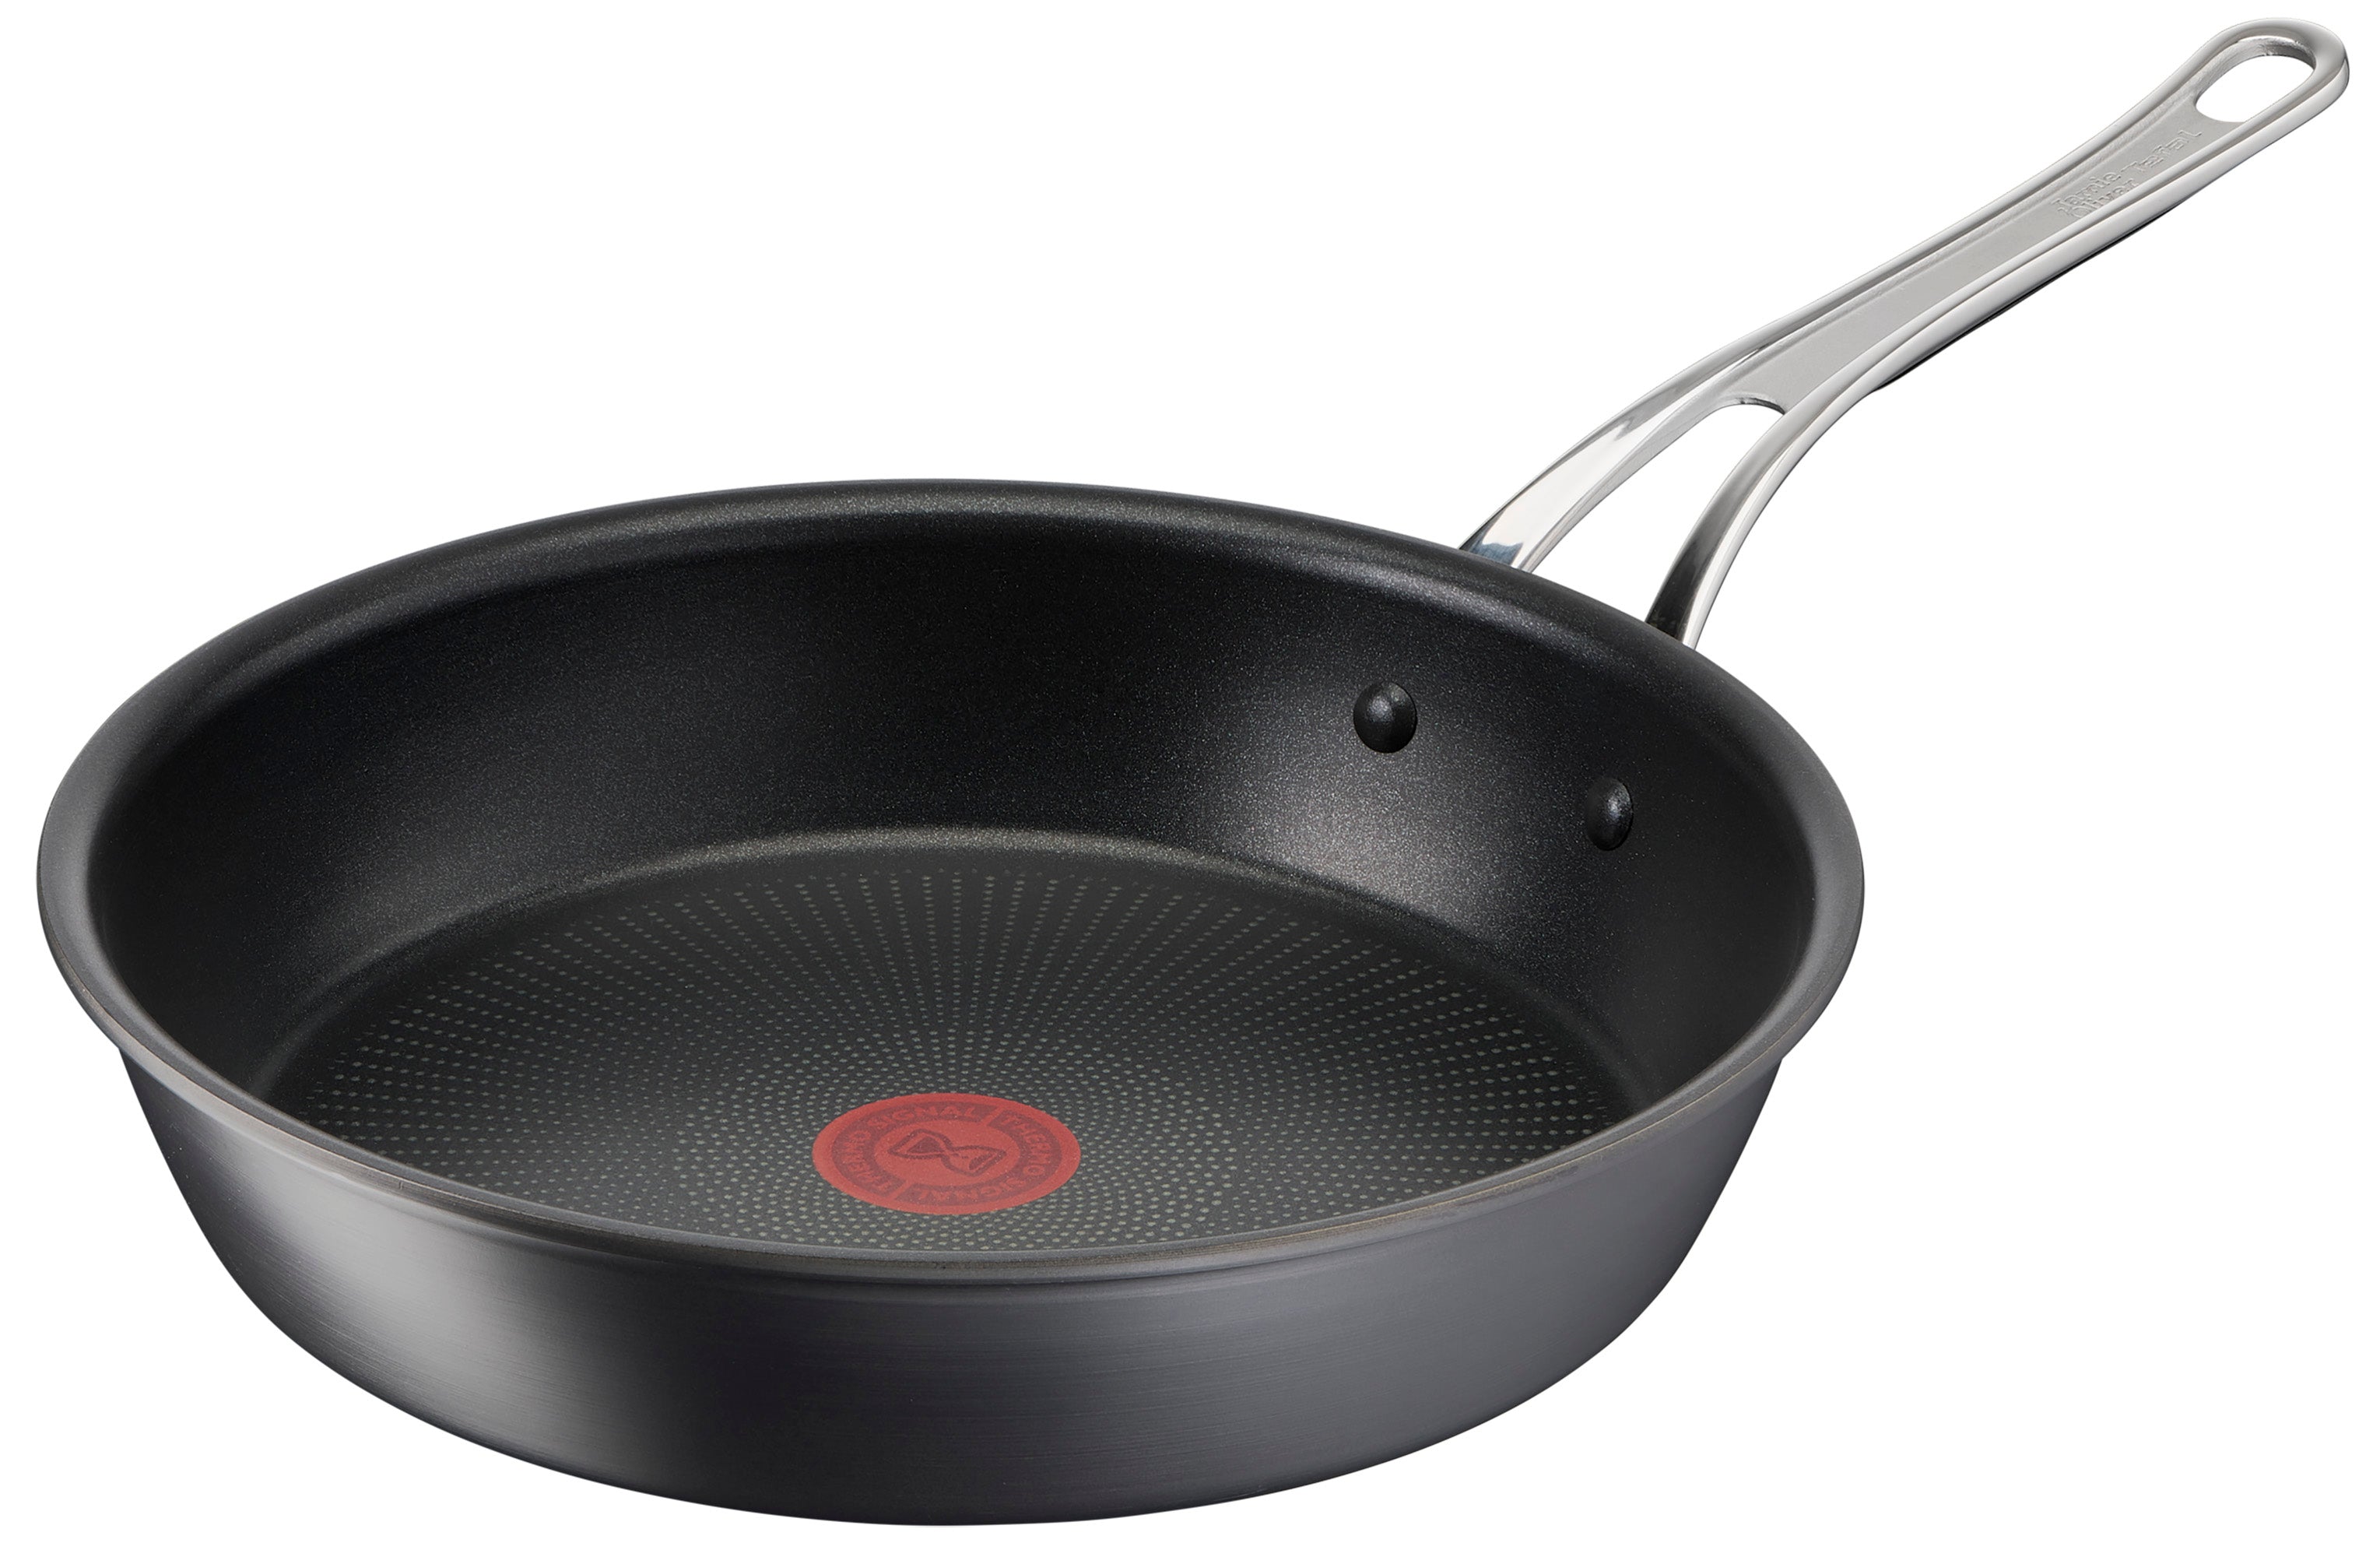 Jamie Oliver by Tefal Cooks Classic Non-Stick Induction Hard Anodised Frypan 28cm